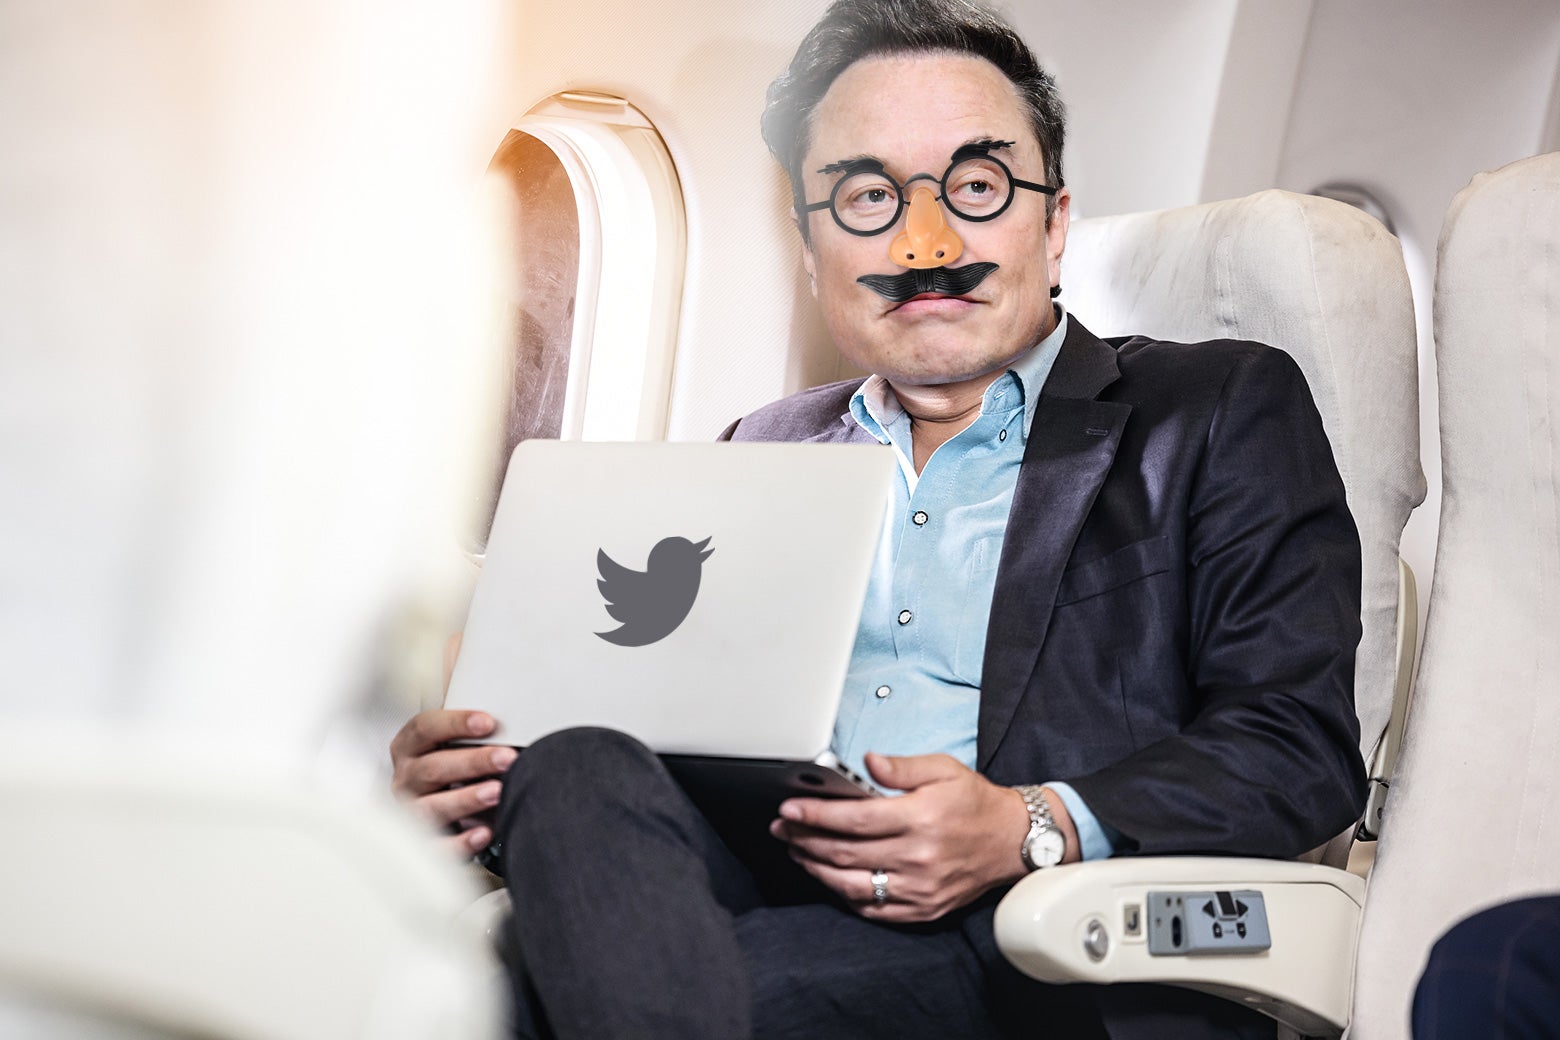 Elon Musk sits in a private plane with a Macbook on his lap and Groucho glasses on his face.